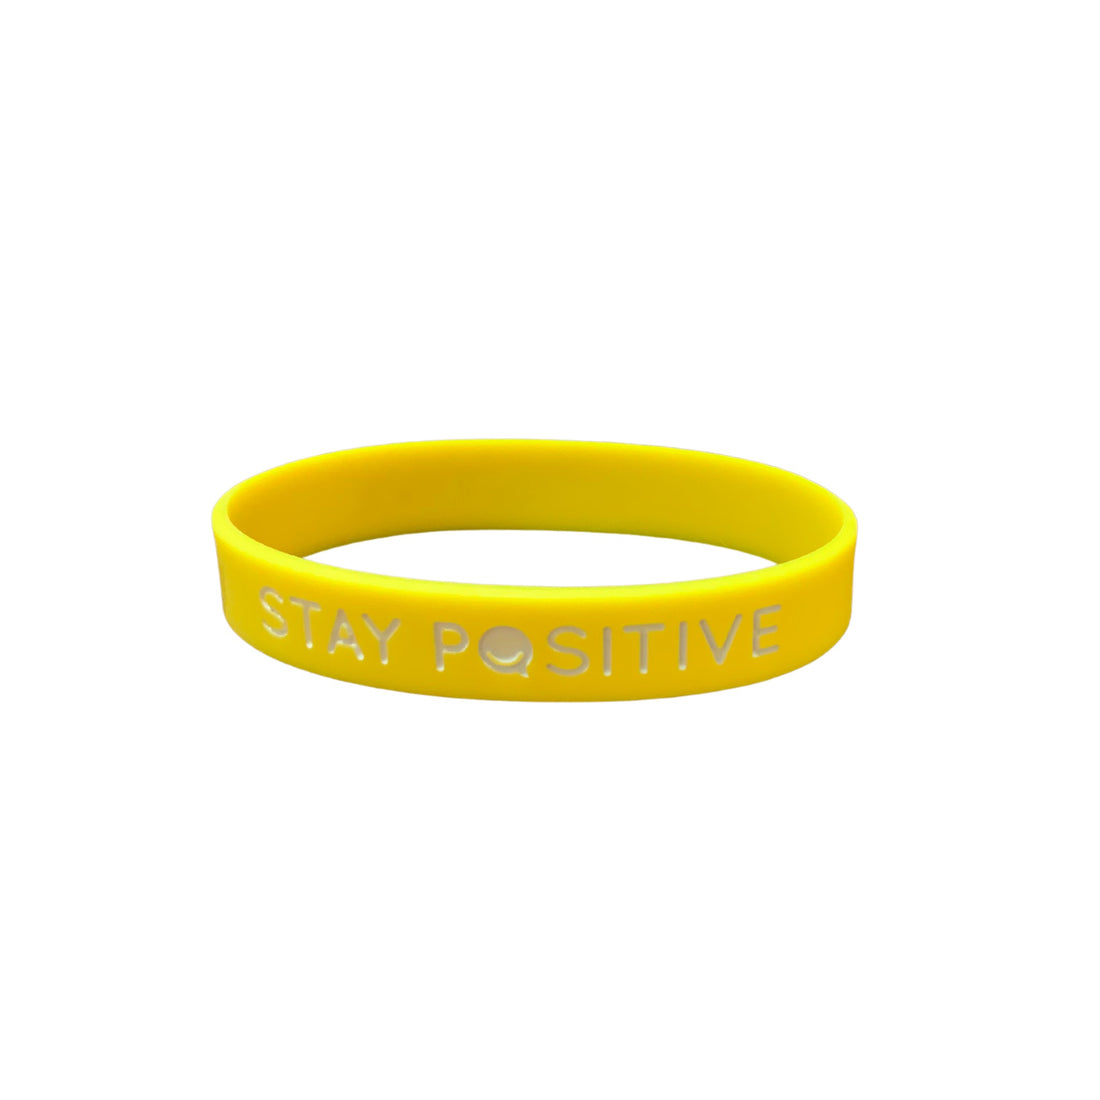 Stay Positive Silicone Wristbands (Volume Discount)